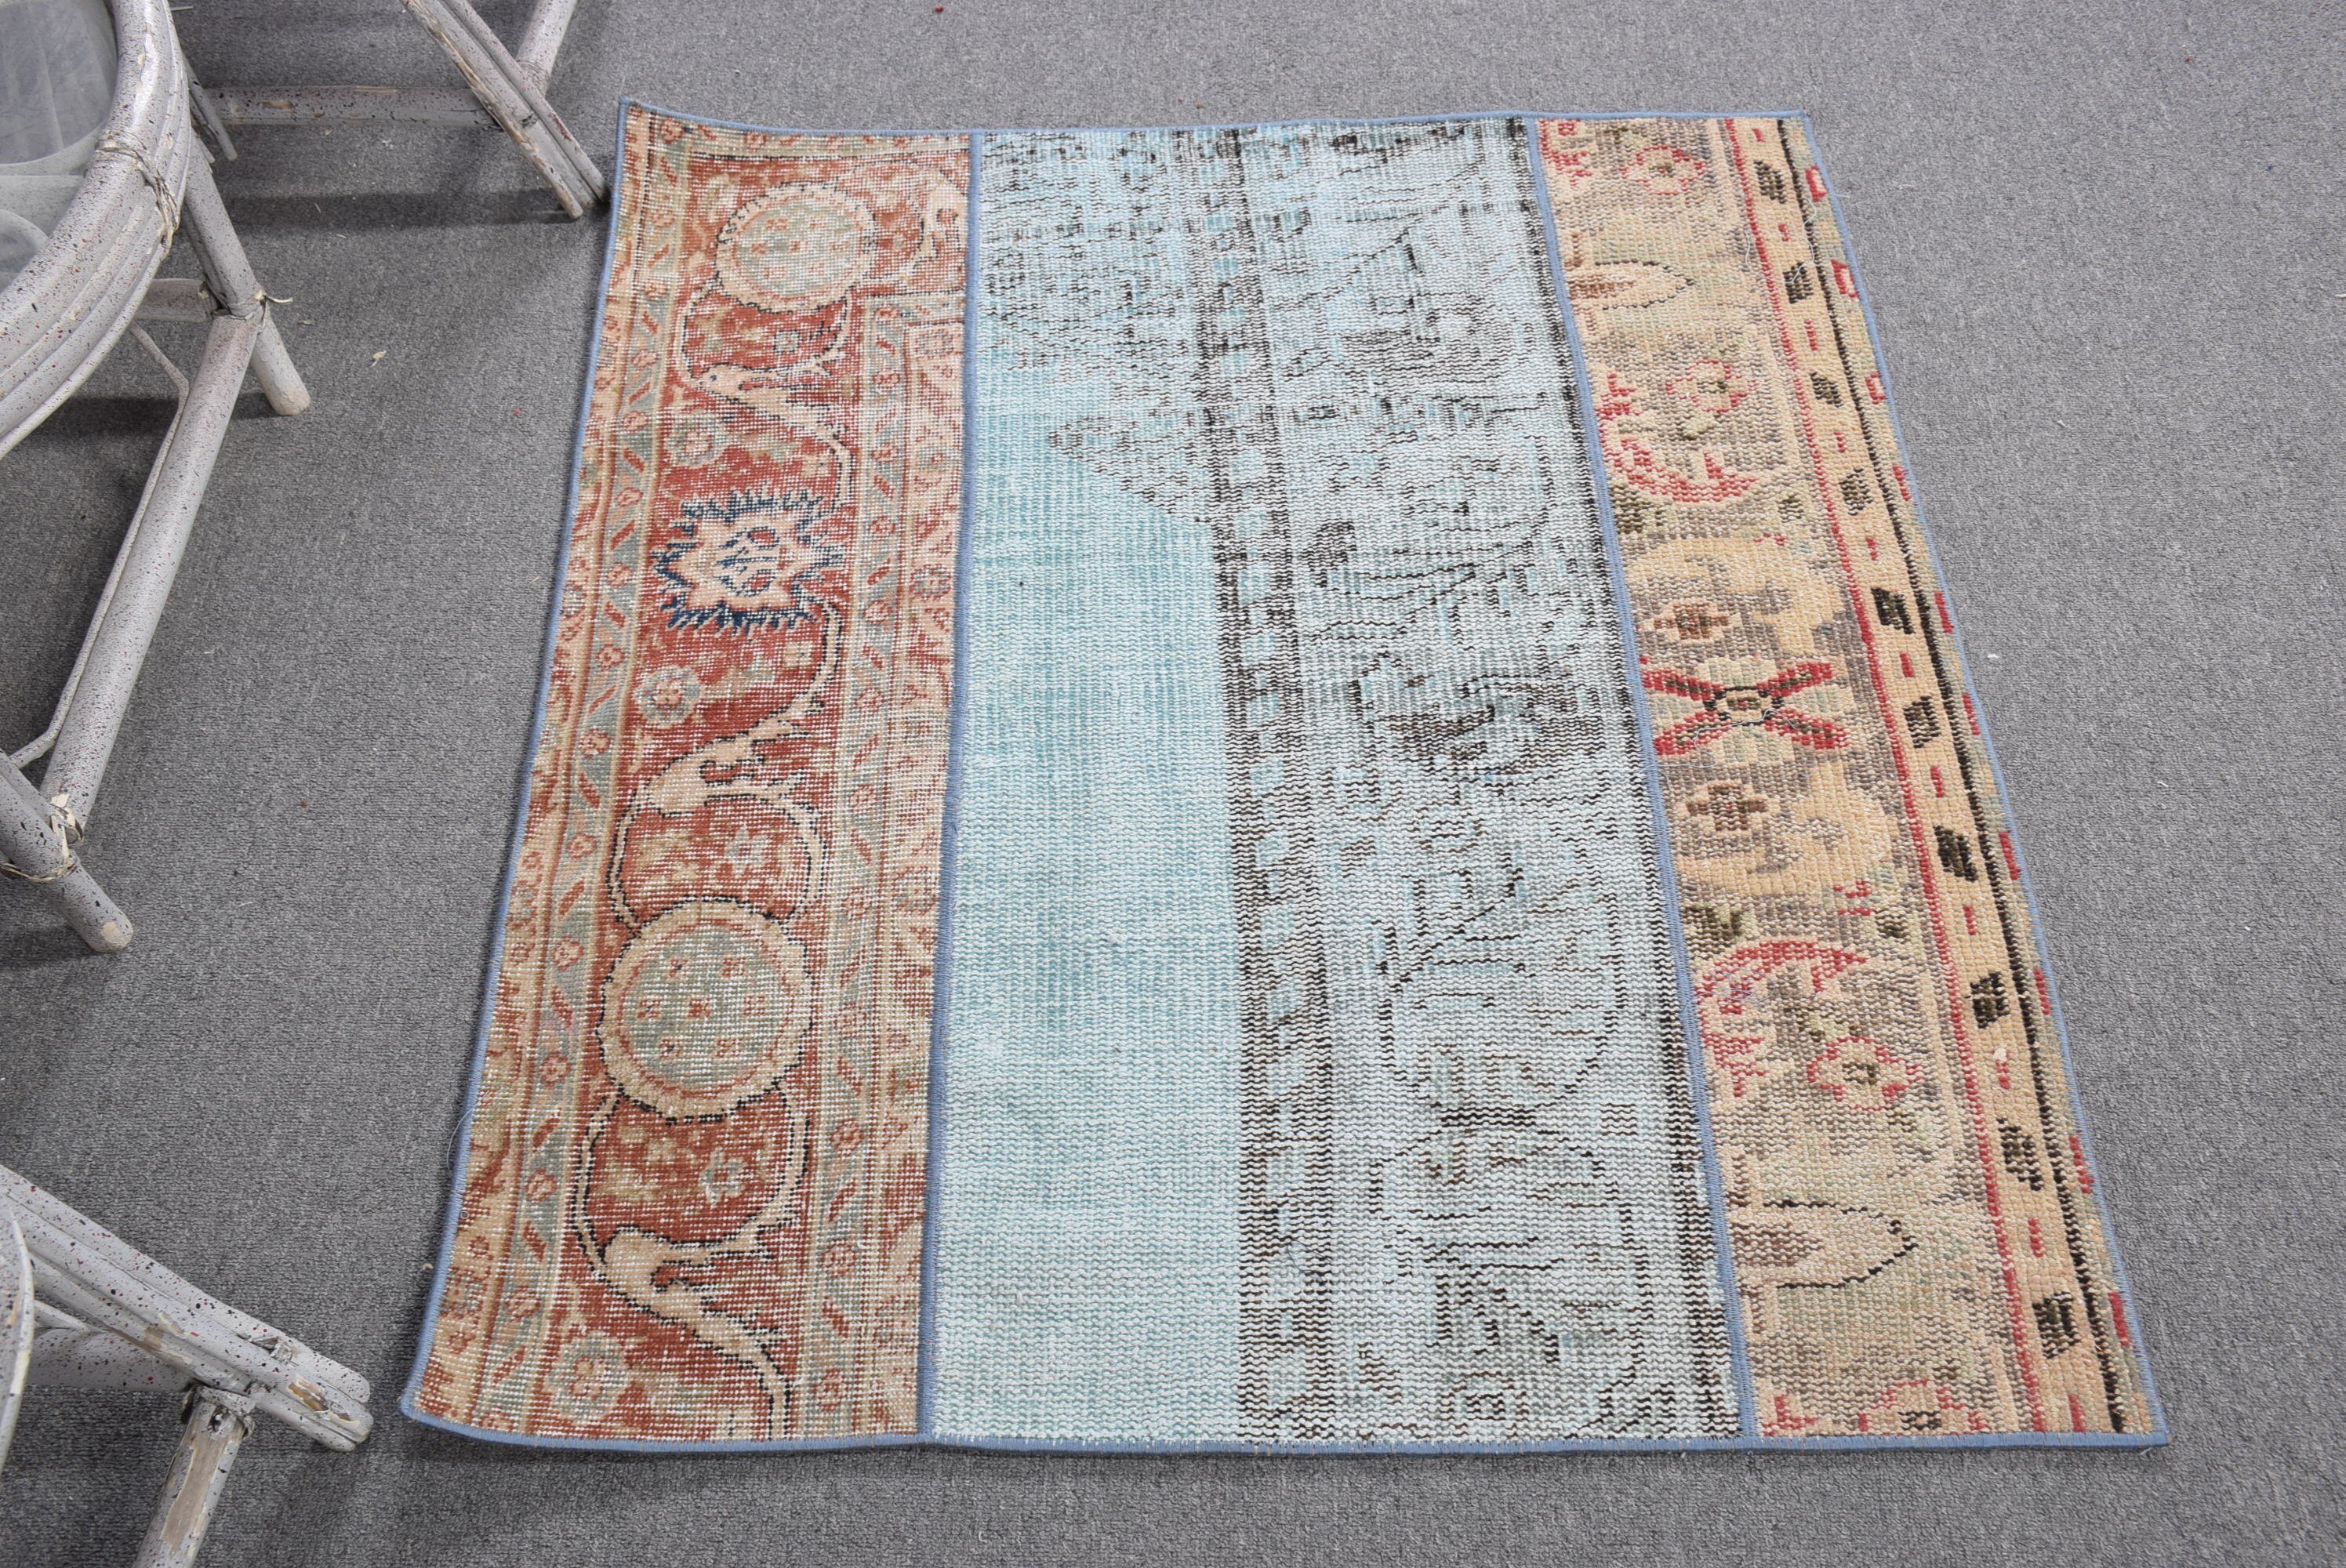 3.2x3.6 ft Small Rugs, Rugs for Bathroom, Home Decor Rug, Vintage Rugs, Door Mat Rugs, Kitchen Rugs, Turkish Rugs, Blue Moroccan Rugs